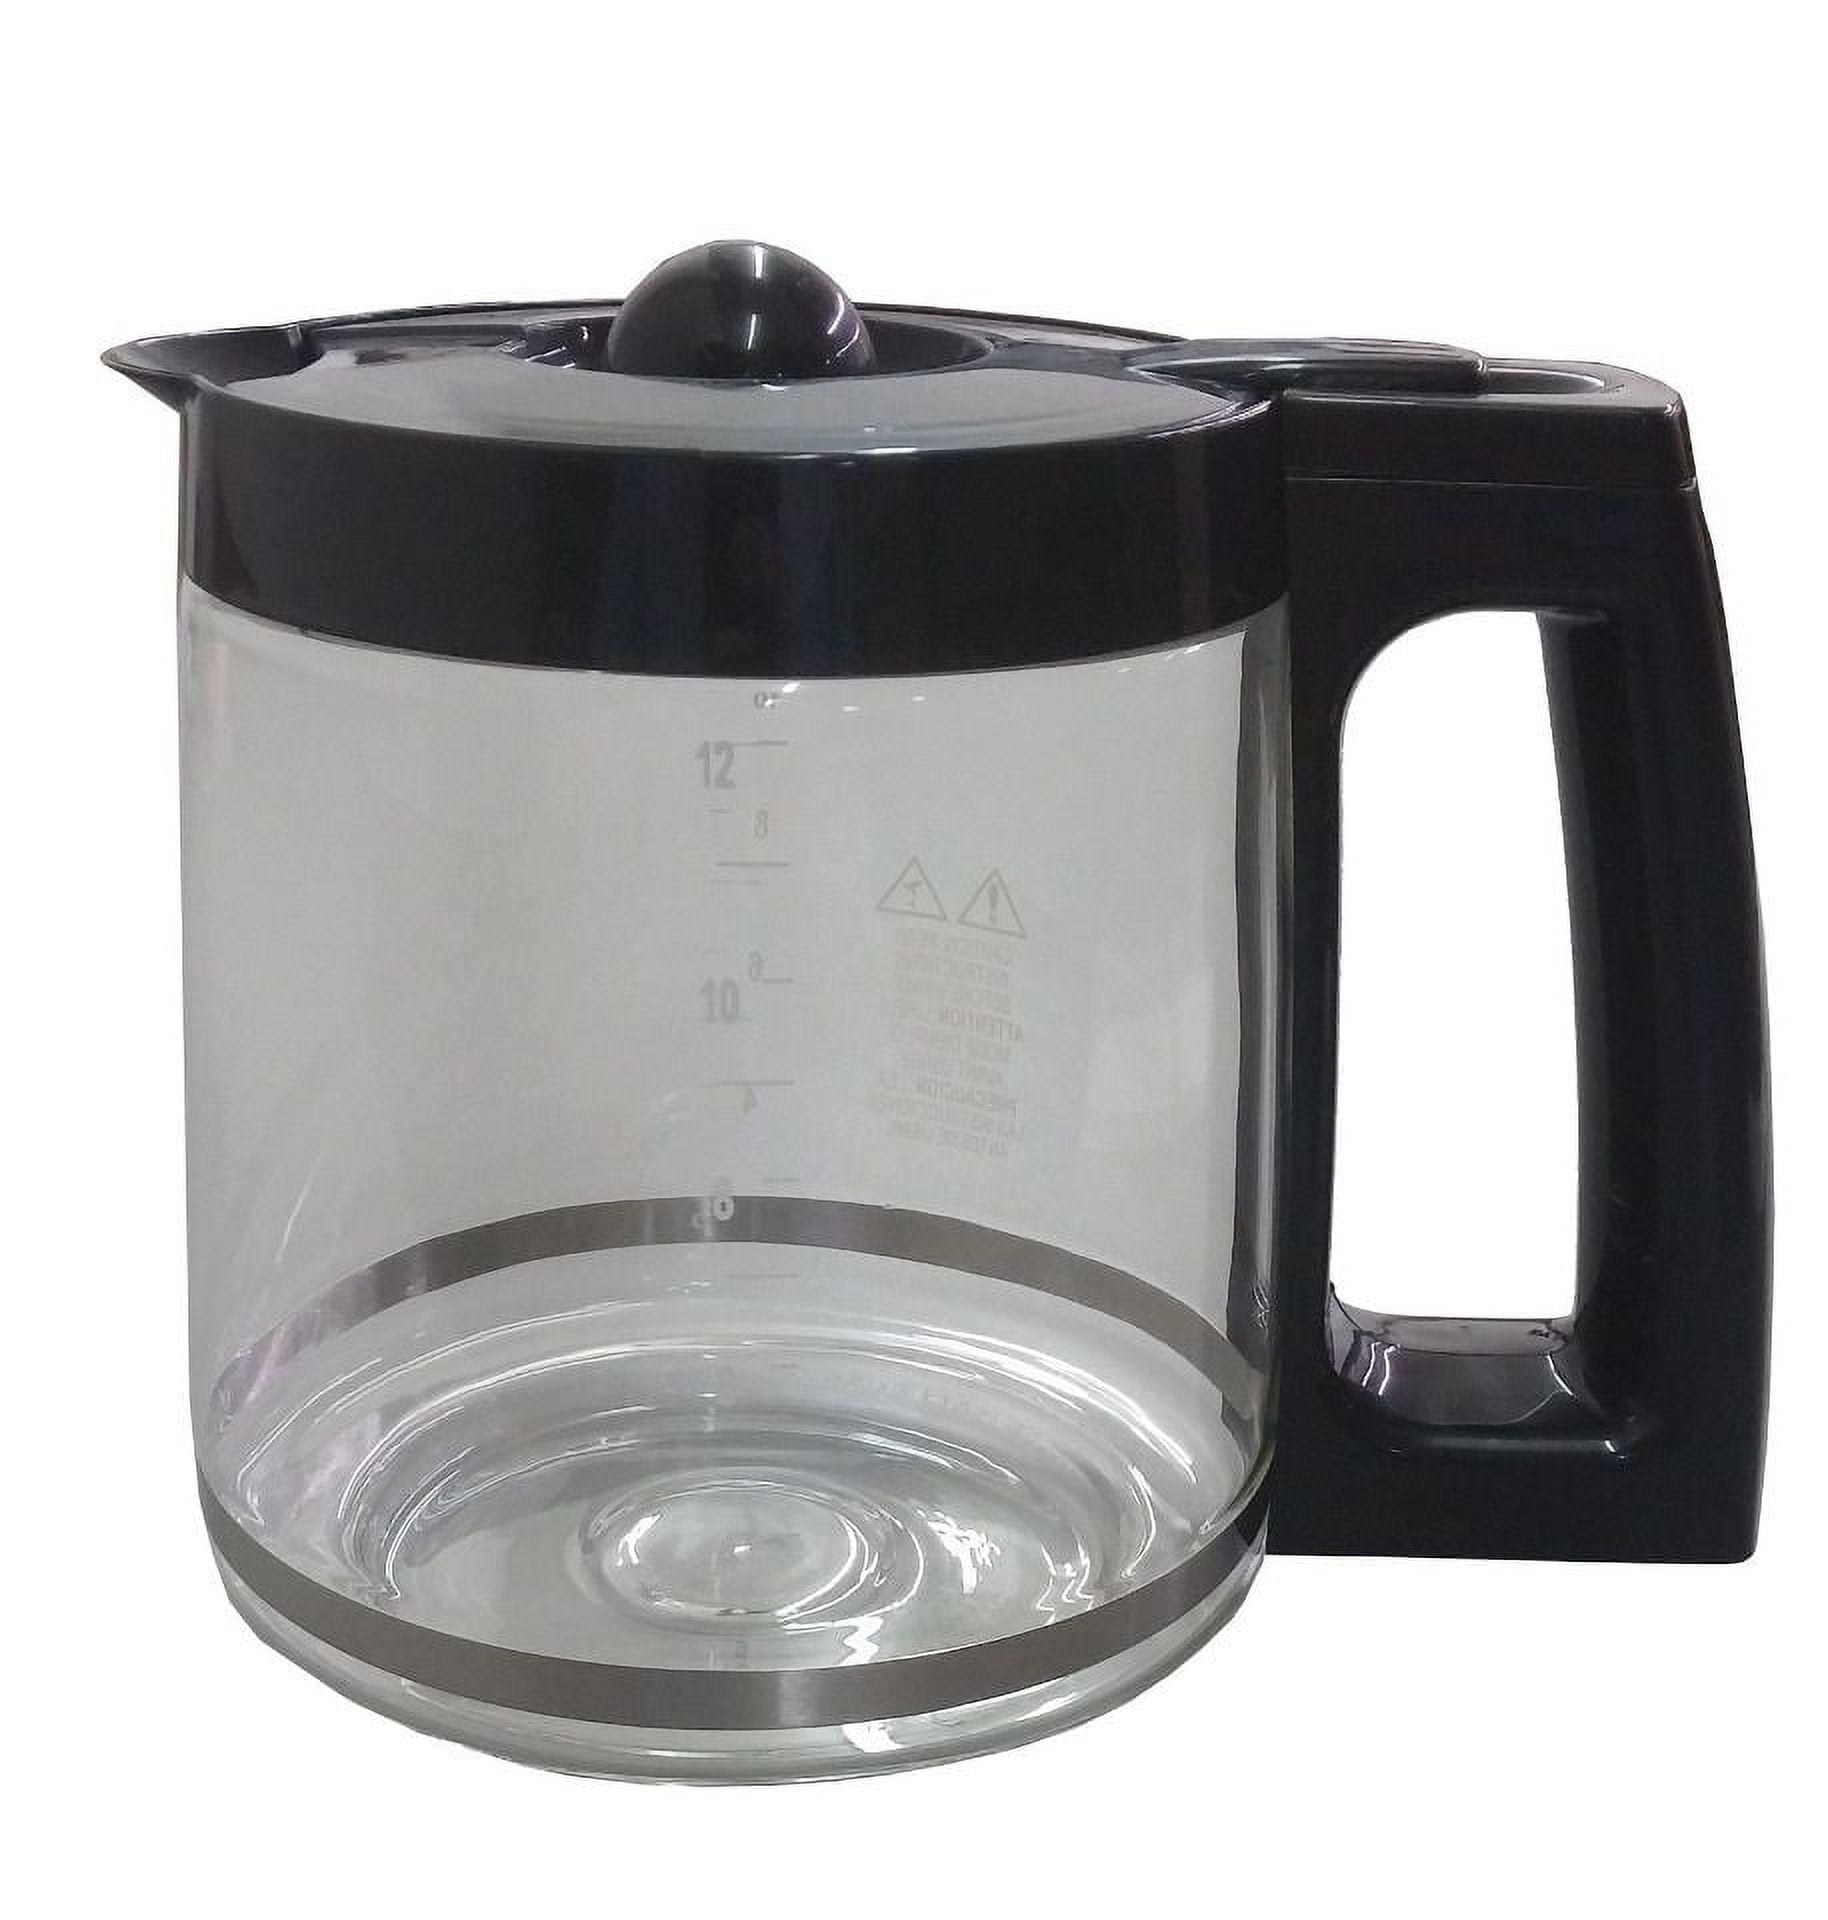 Ulrempart 12-Cup Replacement Coffee Carafe Pot Compatible with Hamilton  Coffee Maker, Machine, Brewer Models 49980A, 49980Z, 49983, 49618, 46300